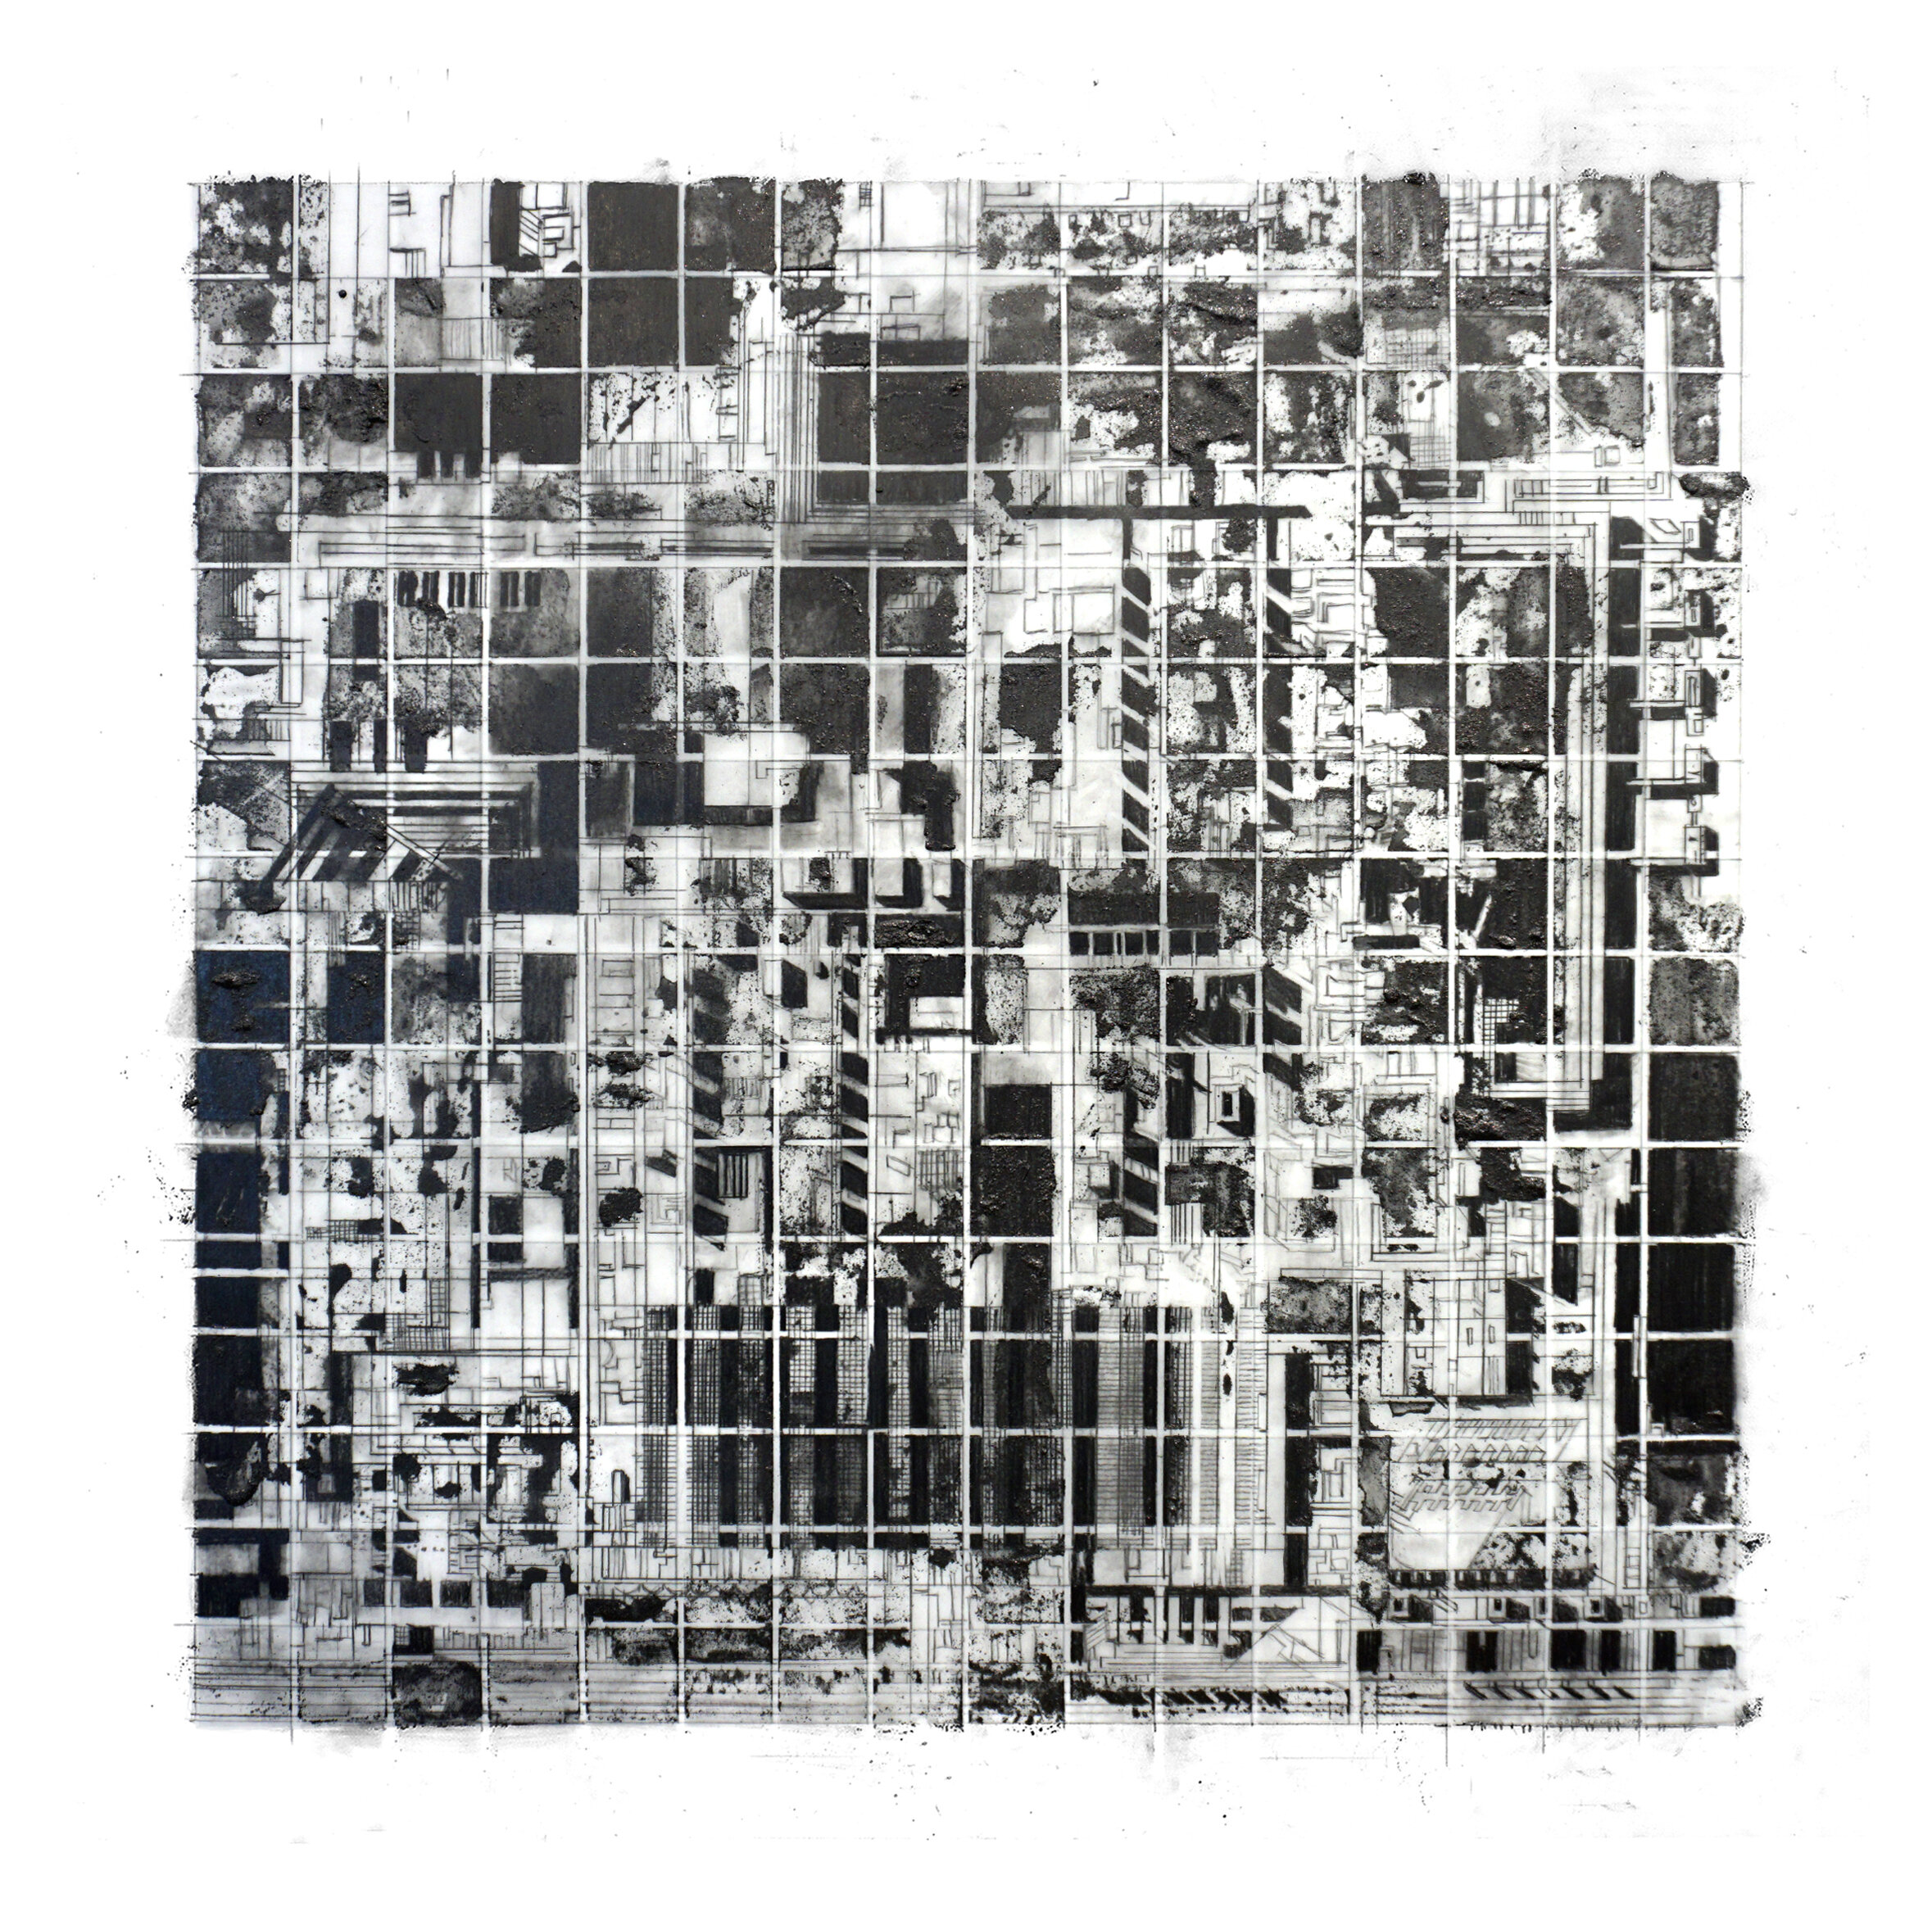  Cheryl Goldsleger  Aspiration , a study of  The Disappearing City,  2006 Graphite and mixed media on Mylar 16 1/4 x 16 1/4 